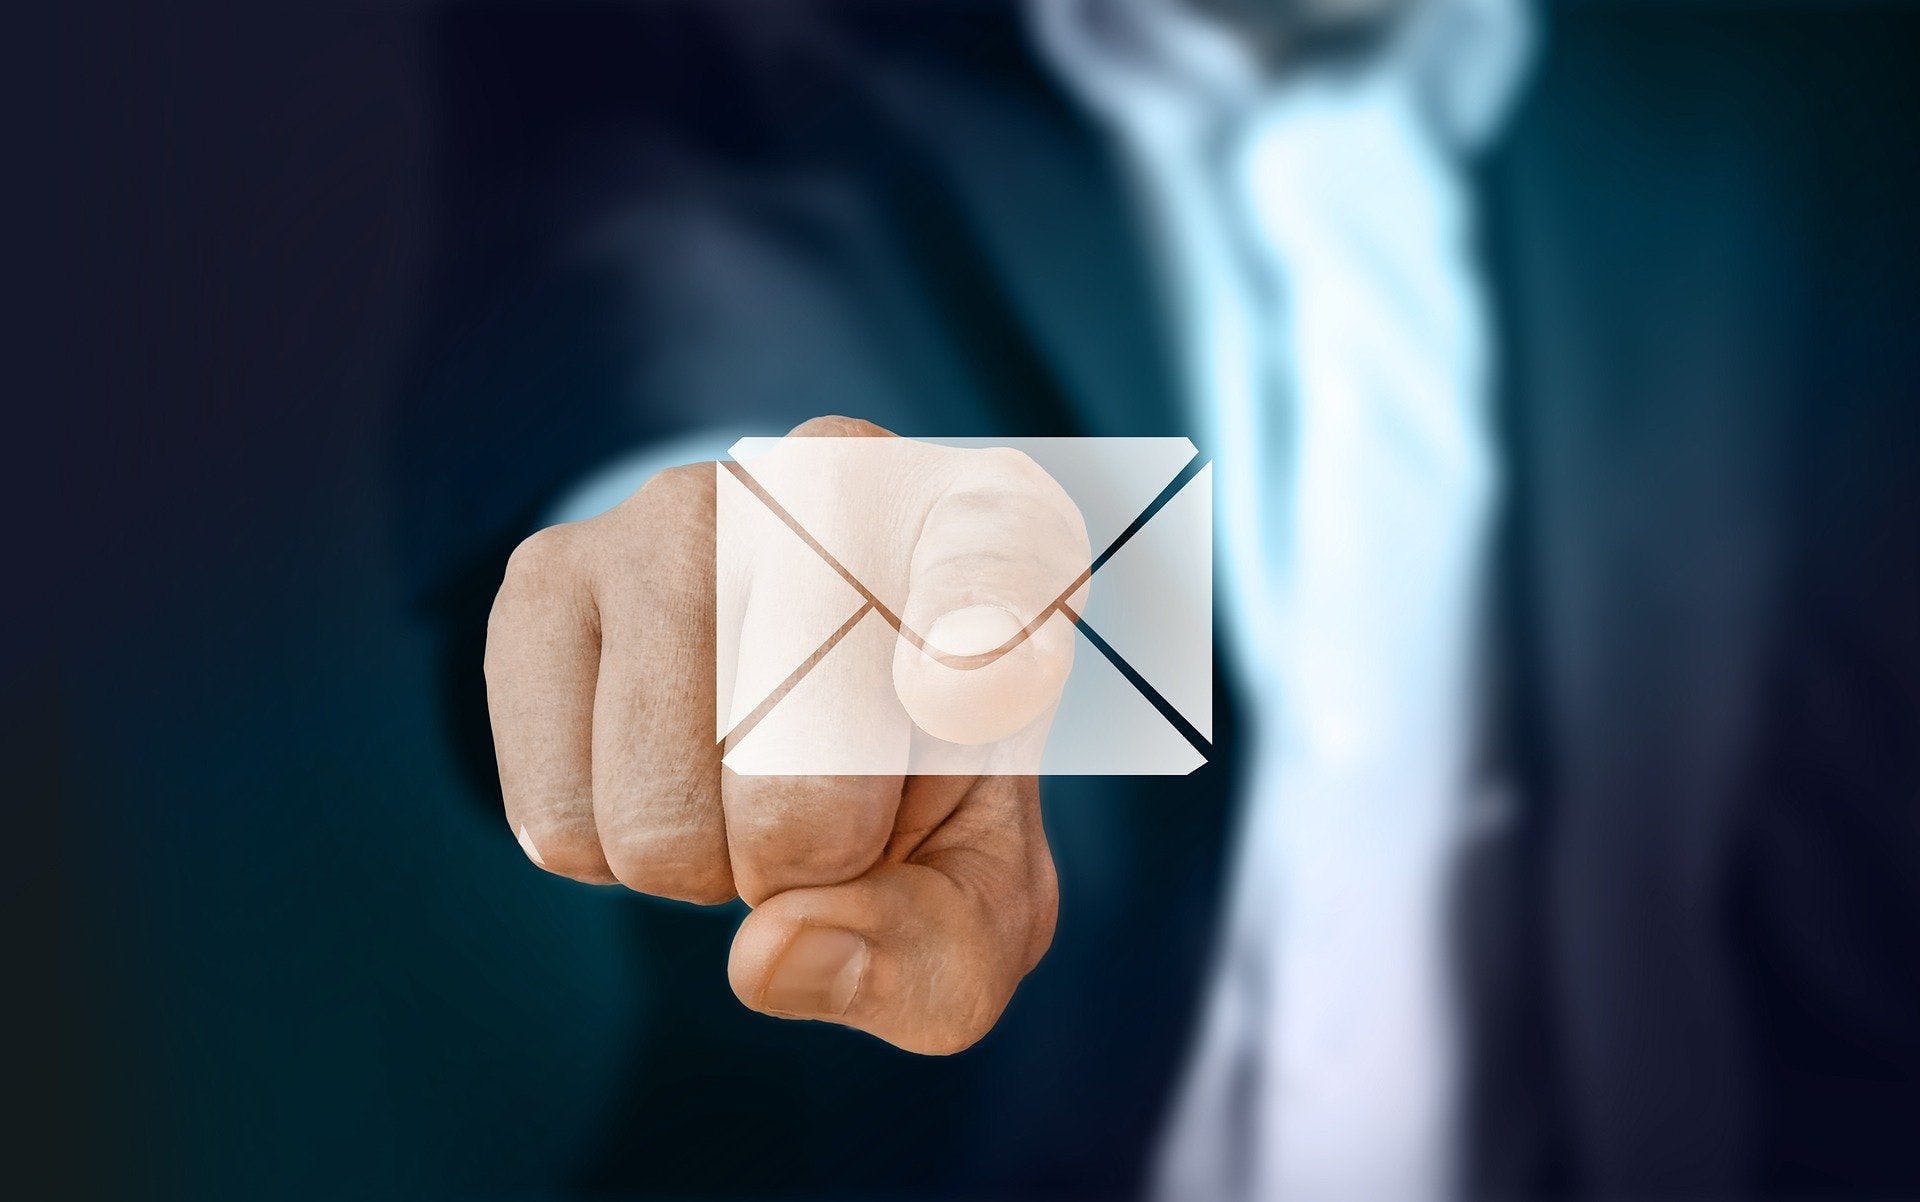 Do Cybercriminals Already Have Access To Your Email?